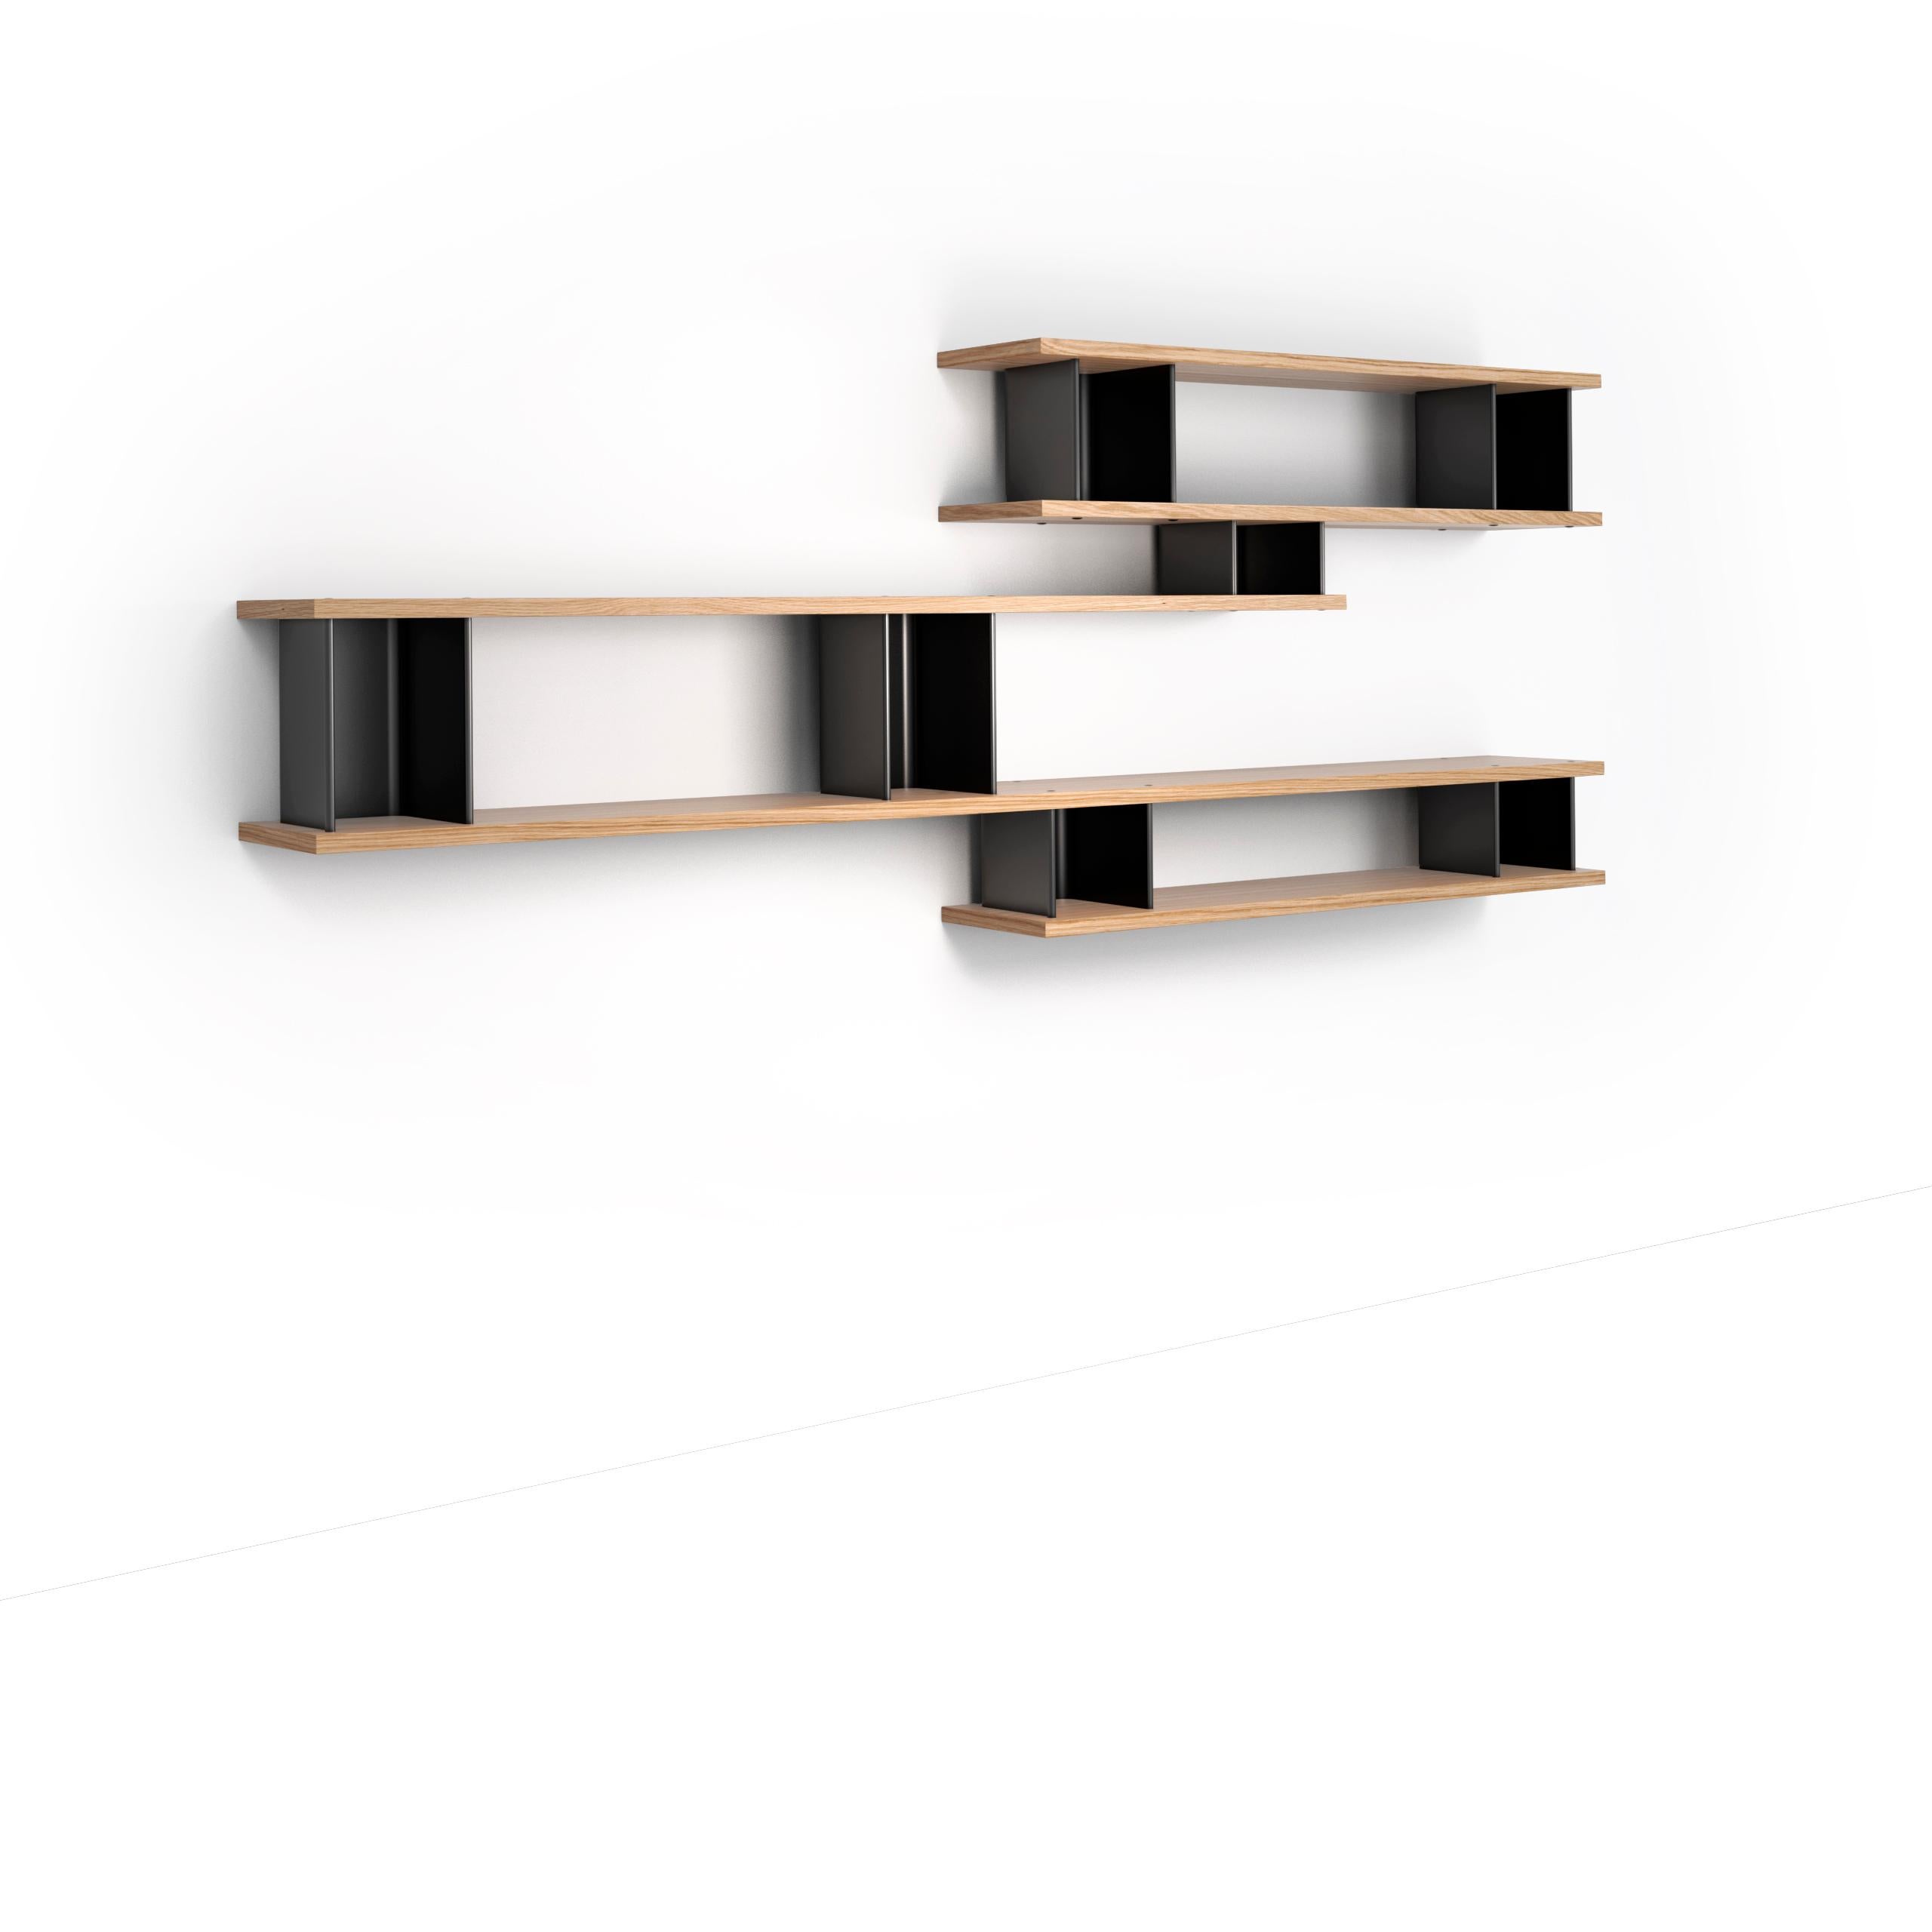 Shelving Unit designed by Charlotte Perriand in 1952-56. Relaunched by Cassina in 2012.
Manufactured by Cassina in Italy.

Nuage à Plots by Charlotte Perriand belongs to a select group of furnishings that are archetypal in the way of interpreting